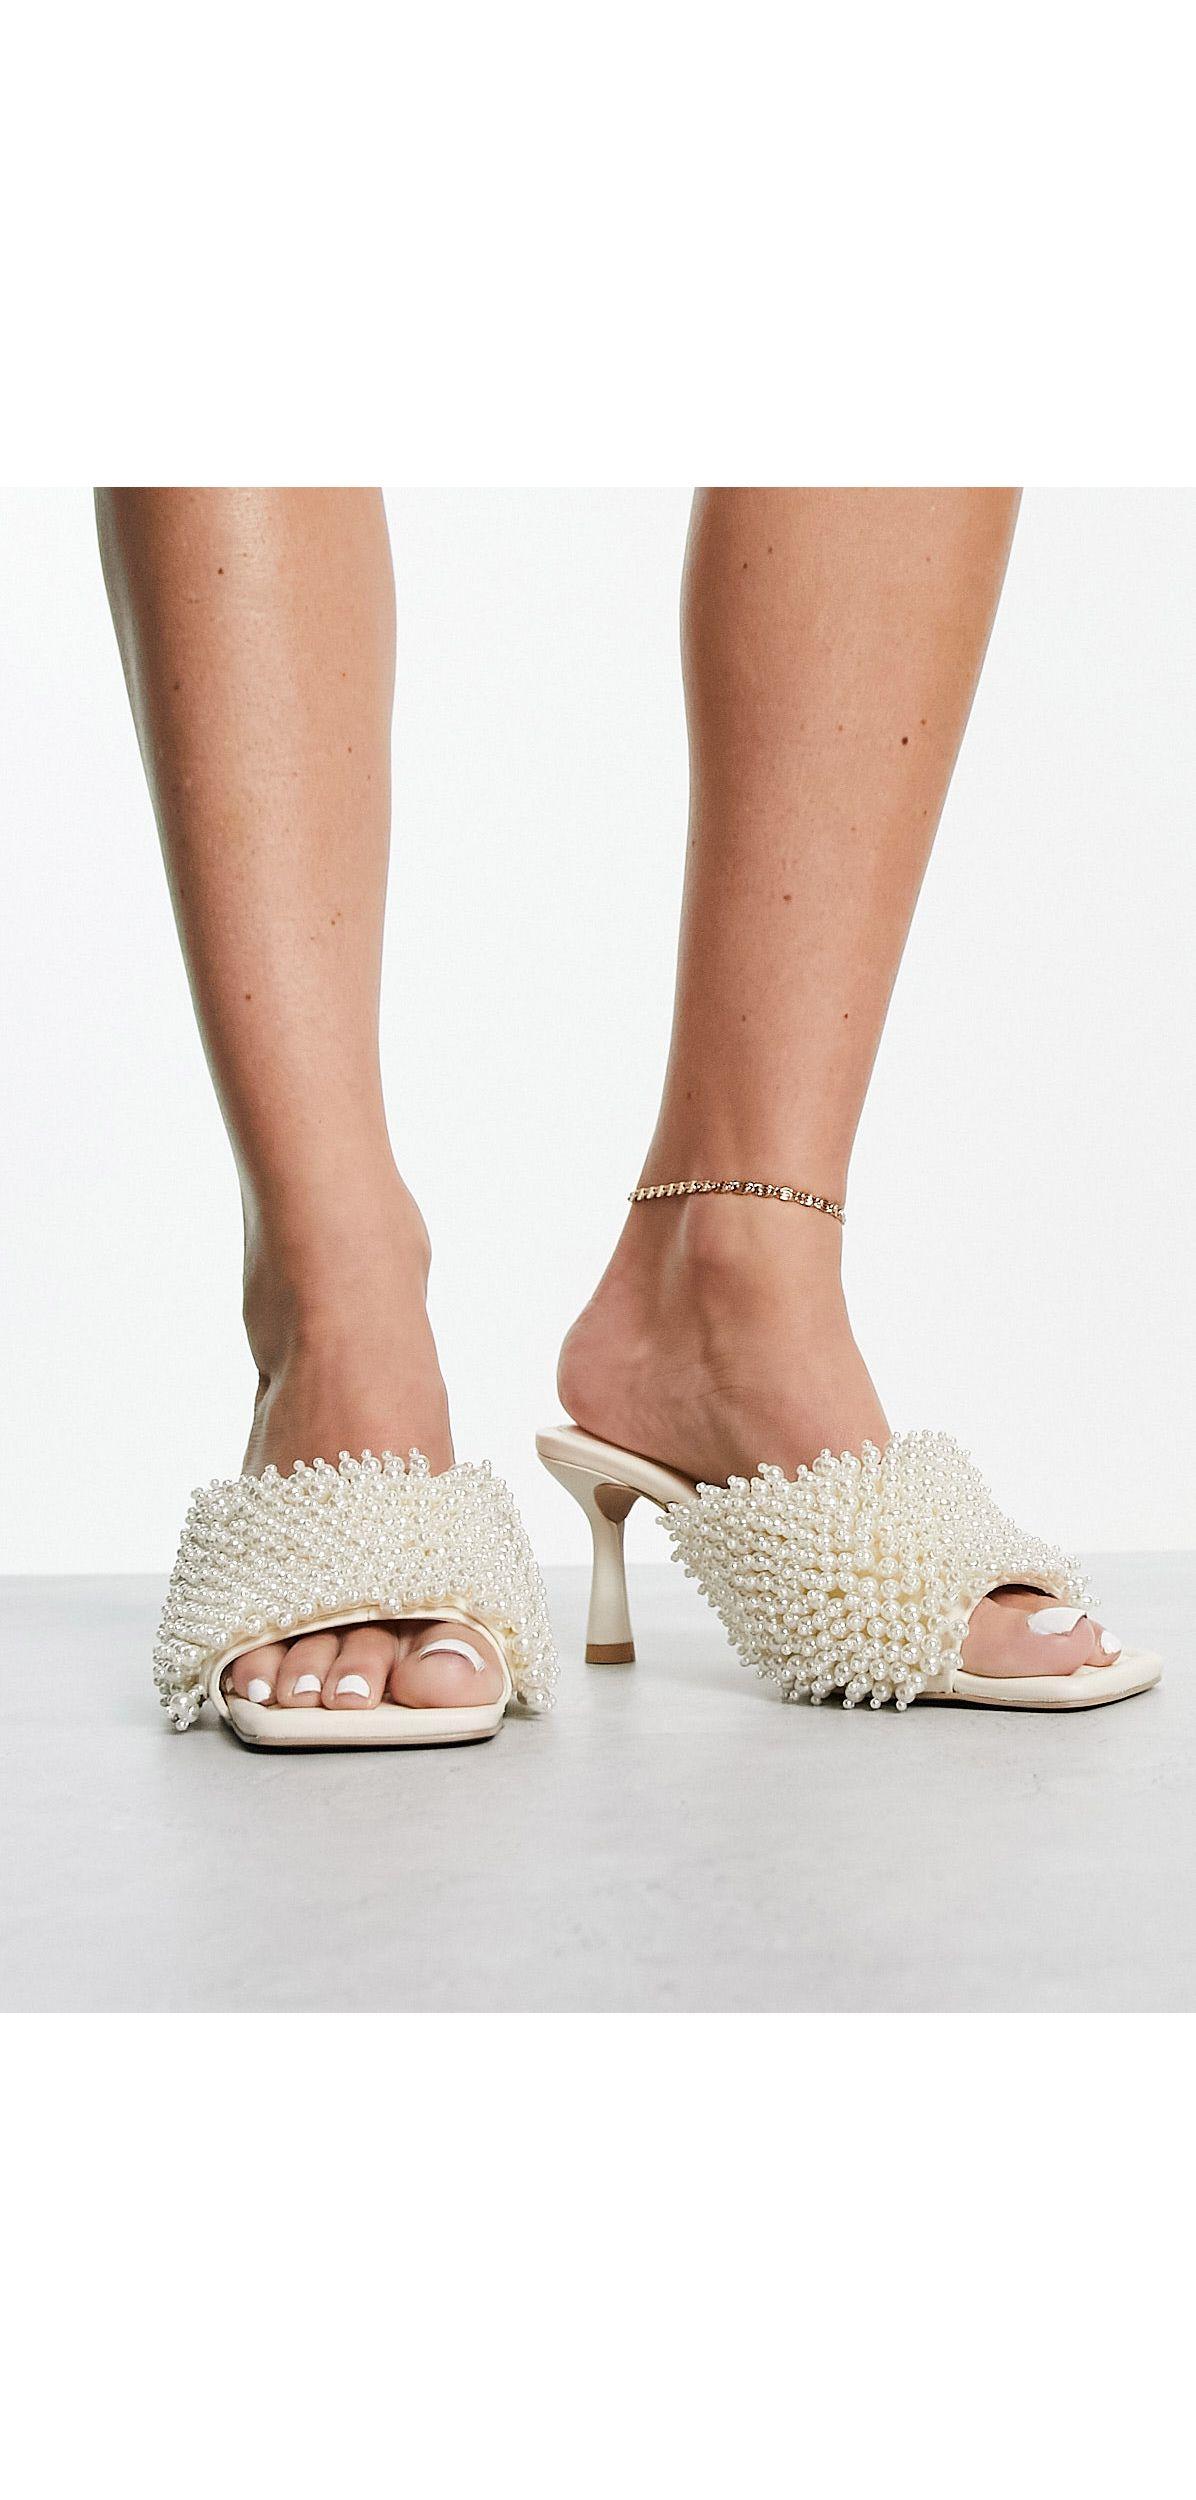 & Other Stories Pearl Covered Heeled Mules in White | Lyst Australia